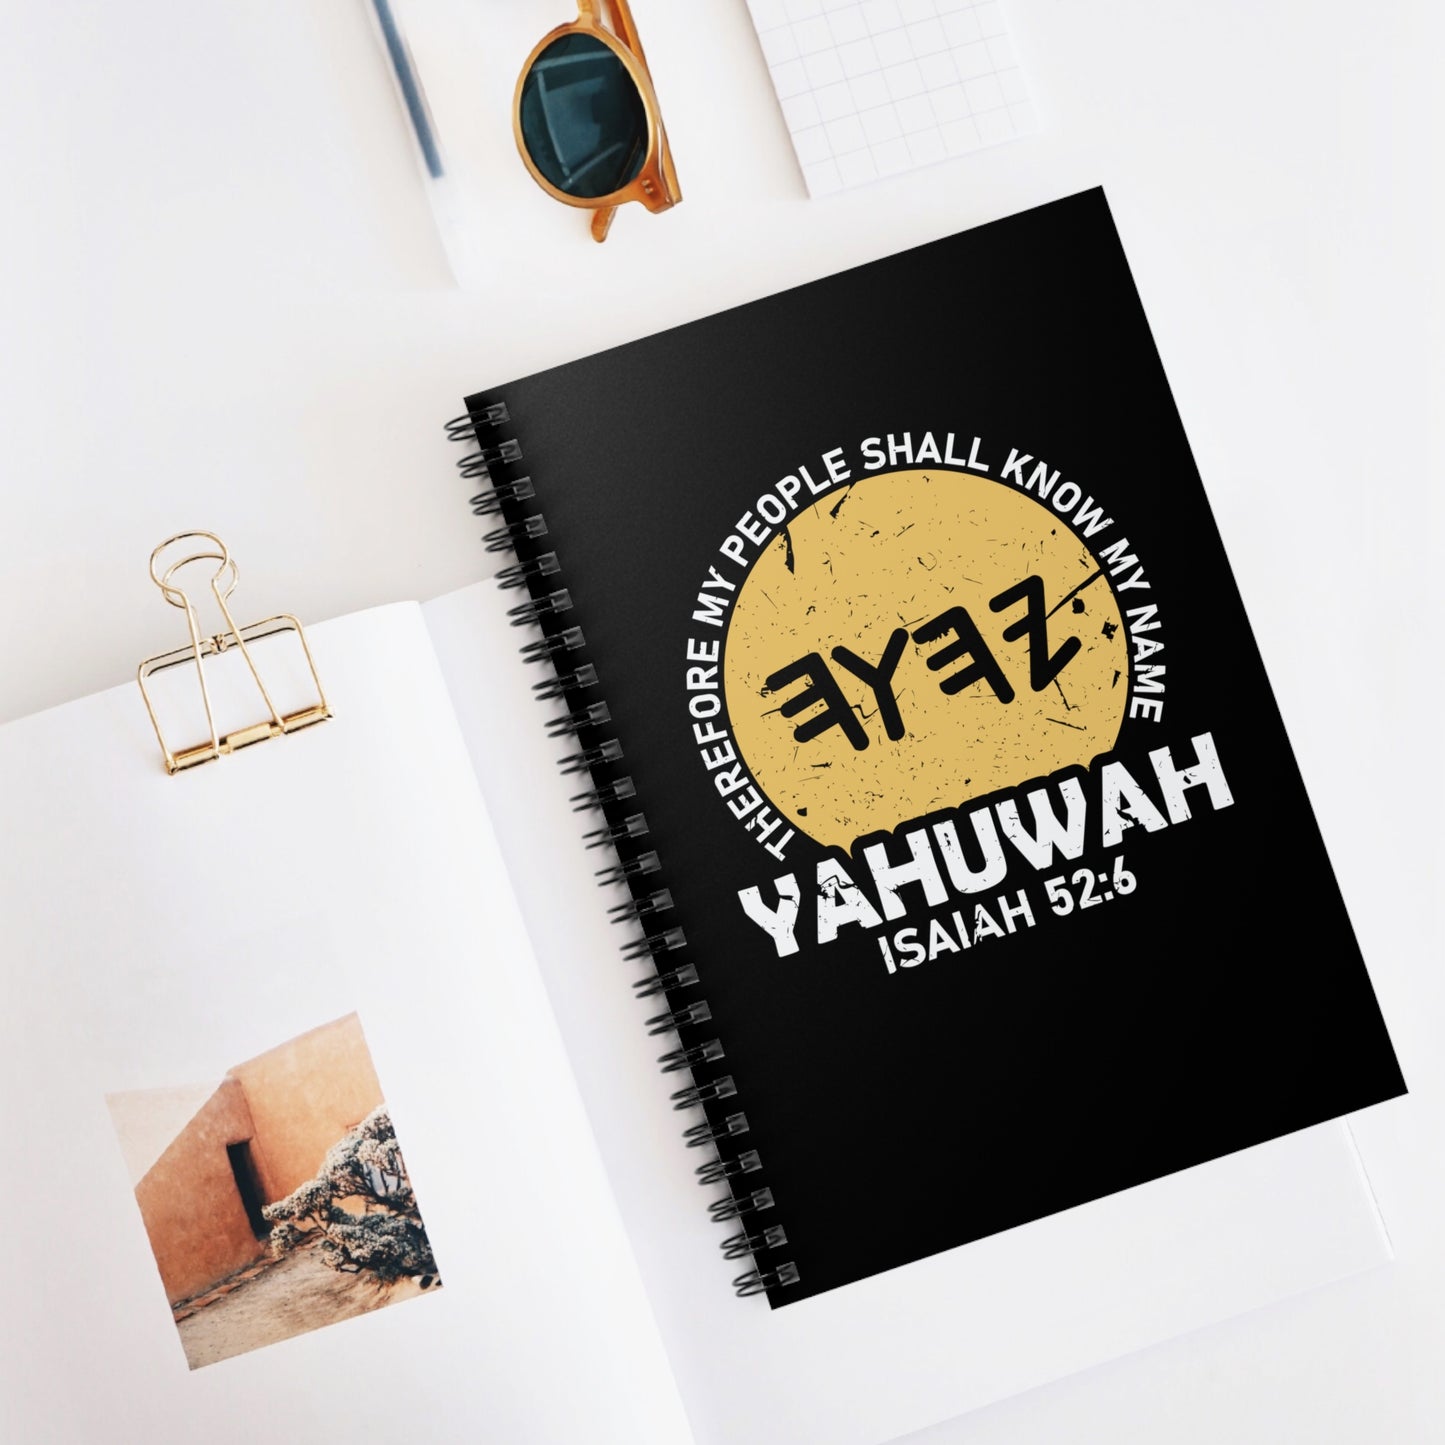 My People Shall Know My Name Yahuwah Prayer Journal Spiral Notebook - Ruled Line